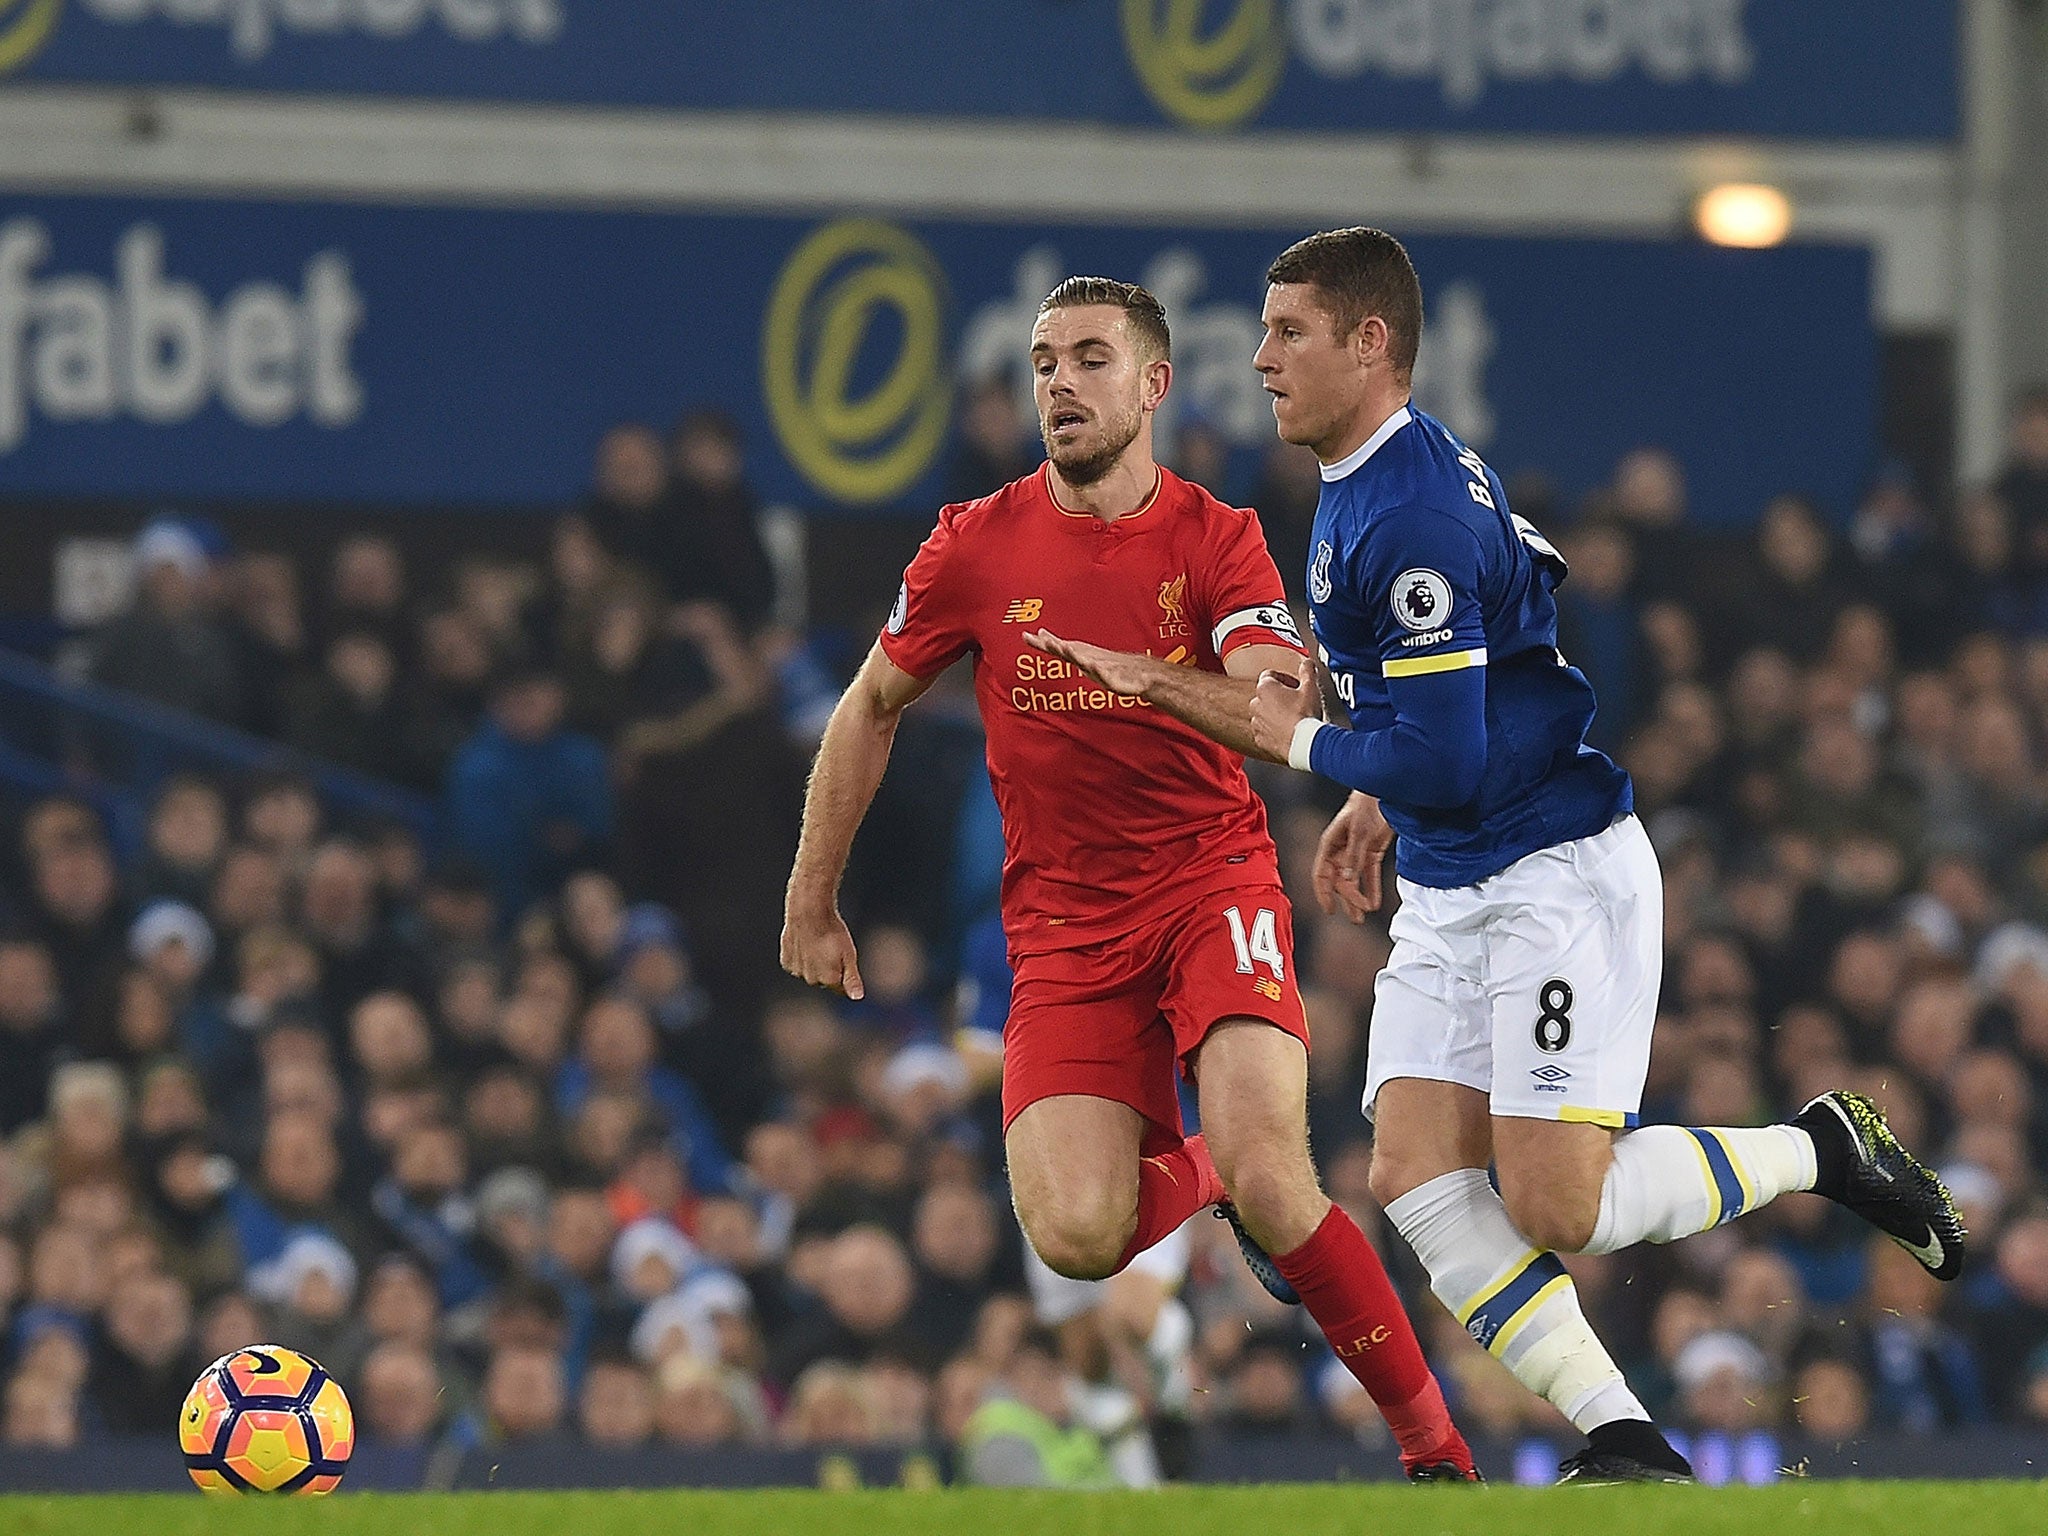 Ross Barkley's tackle on Jordan Henderson was 'shocking', according to Jamie Carragher and Gary Neville